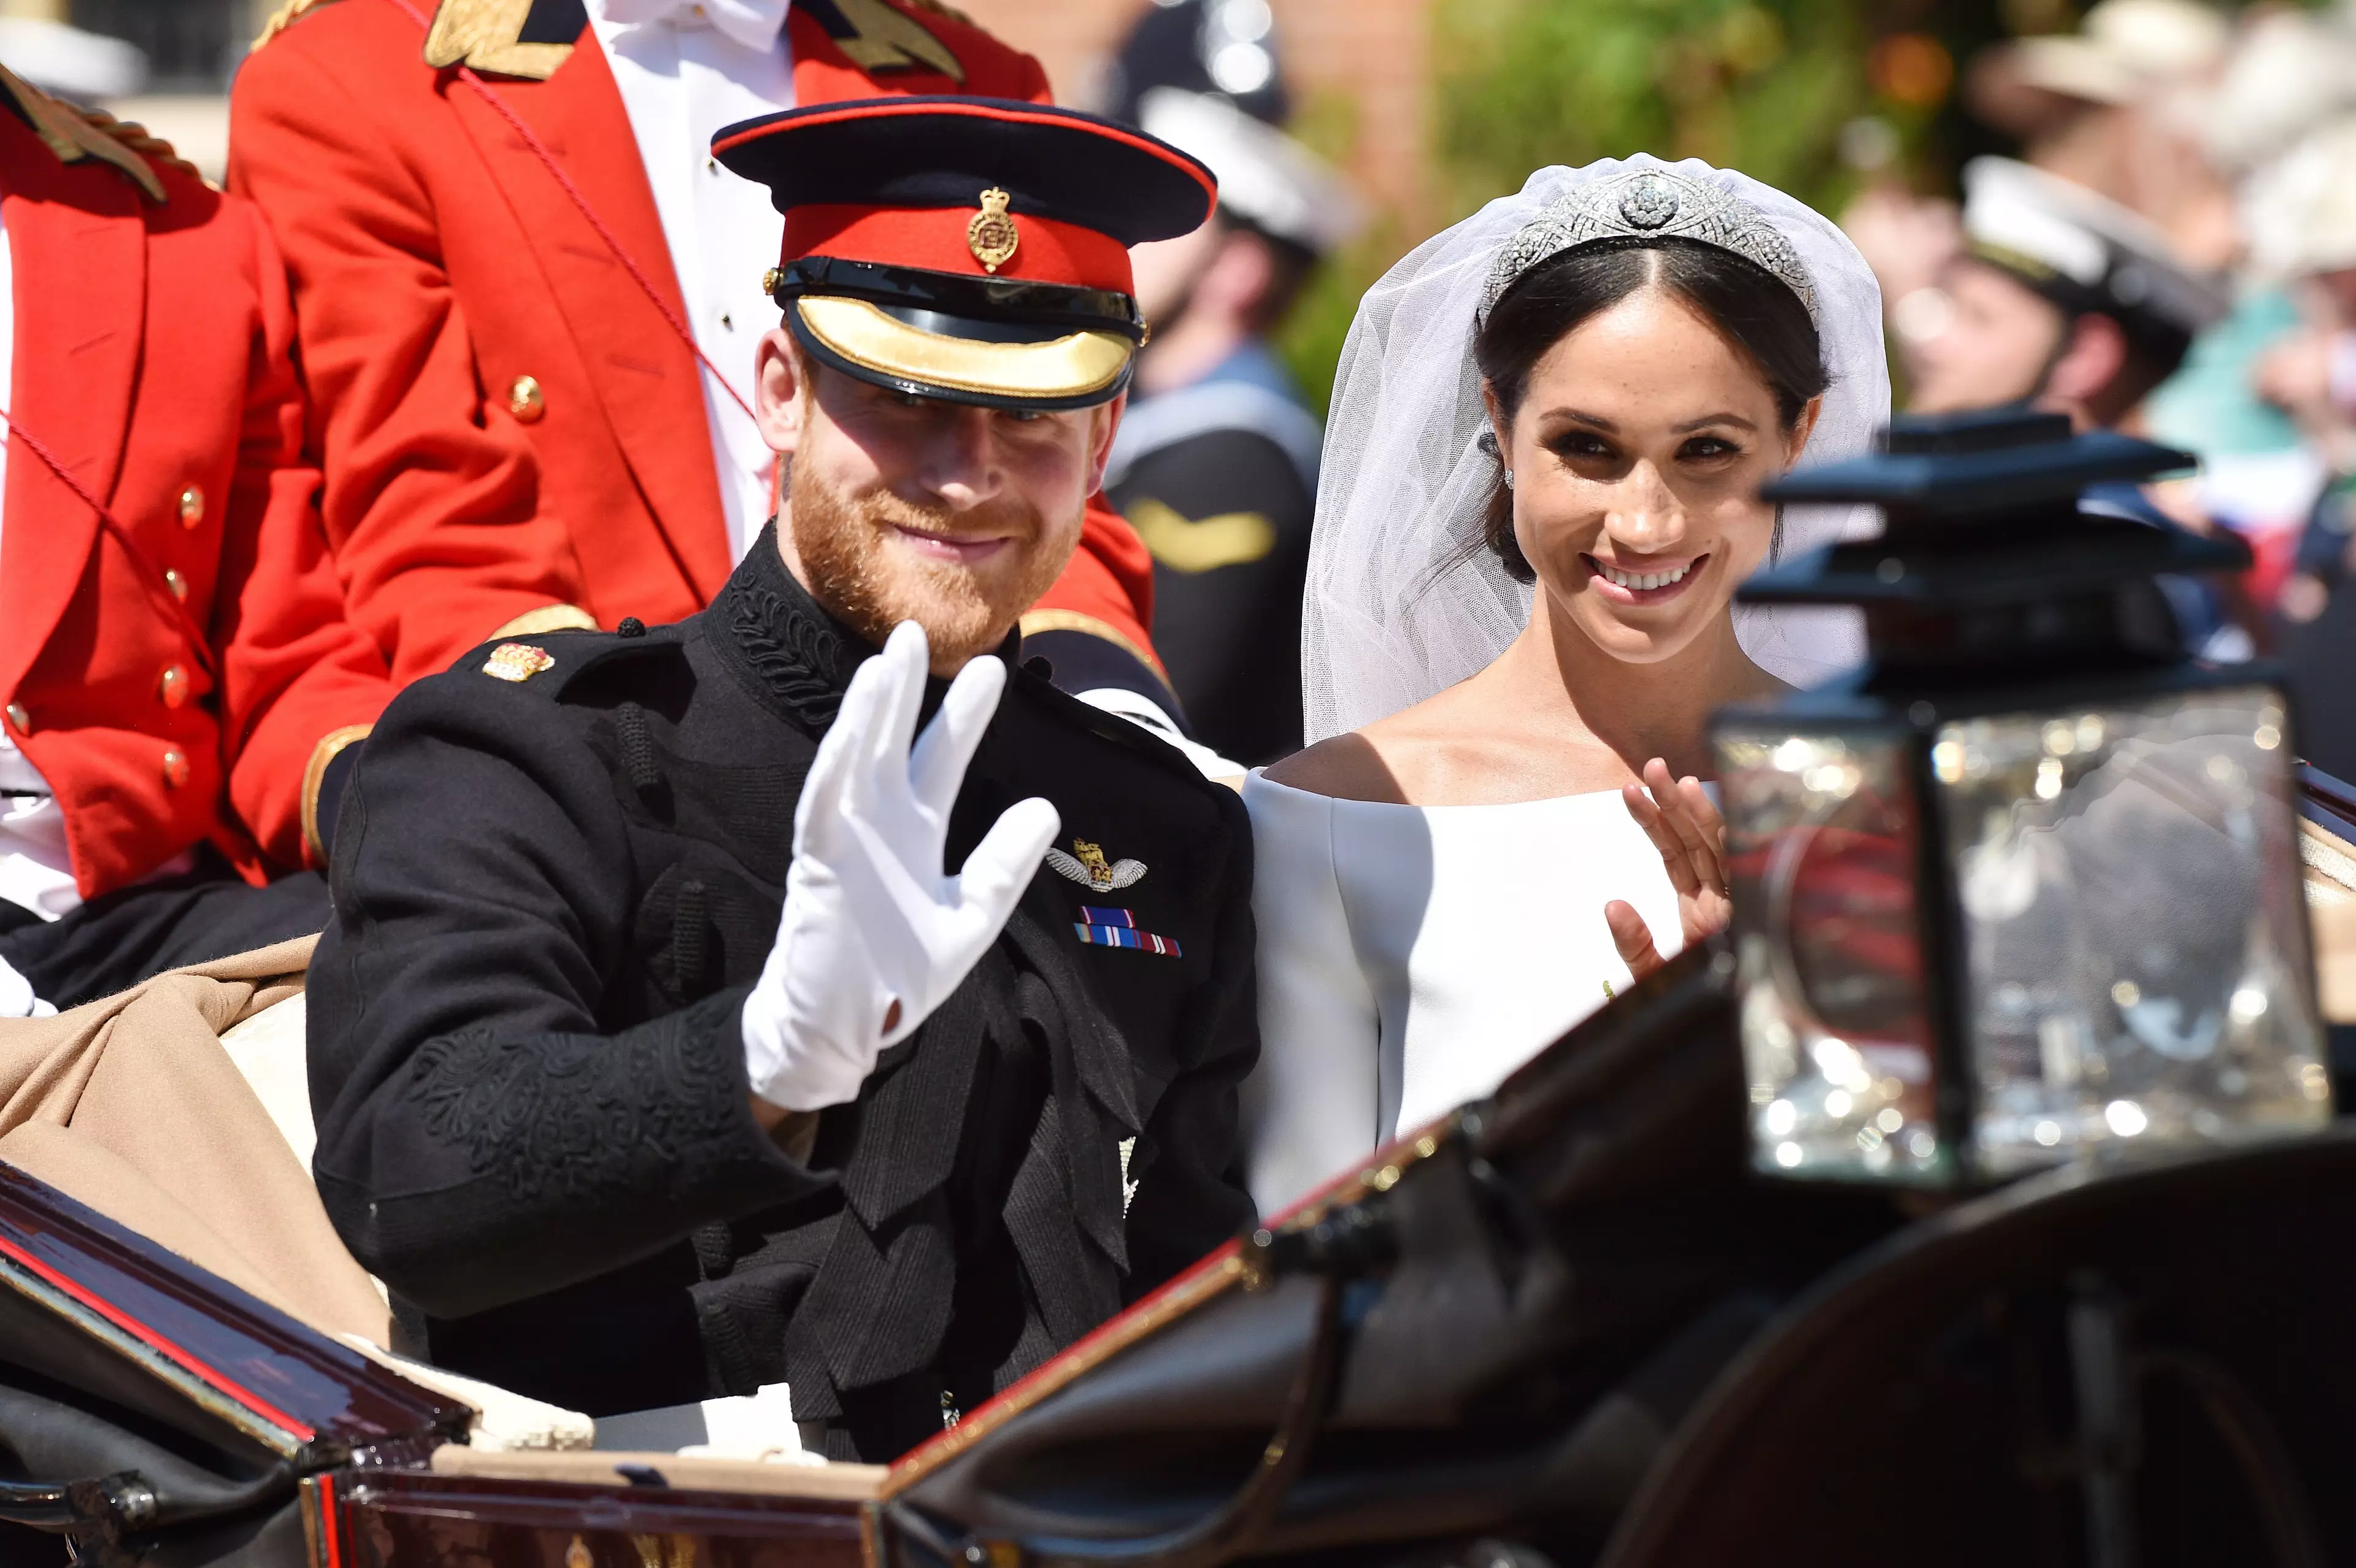 Royal Wedding 2018: Prince Harry To Meghan Markle After The Ceremony: "I'm Ready For A Drink Now!"